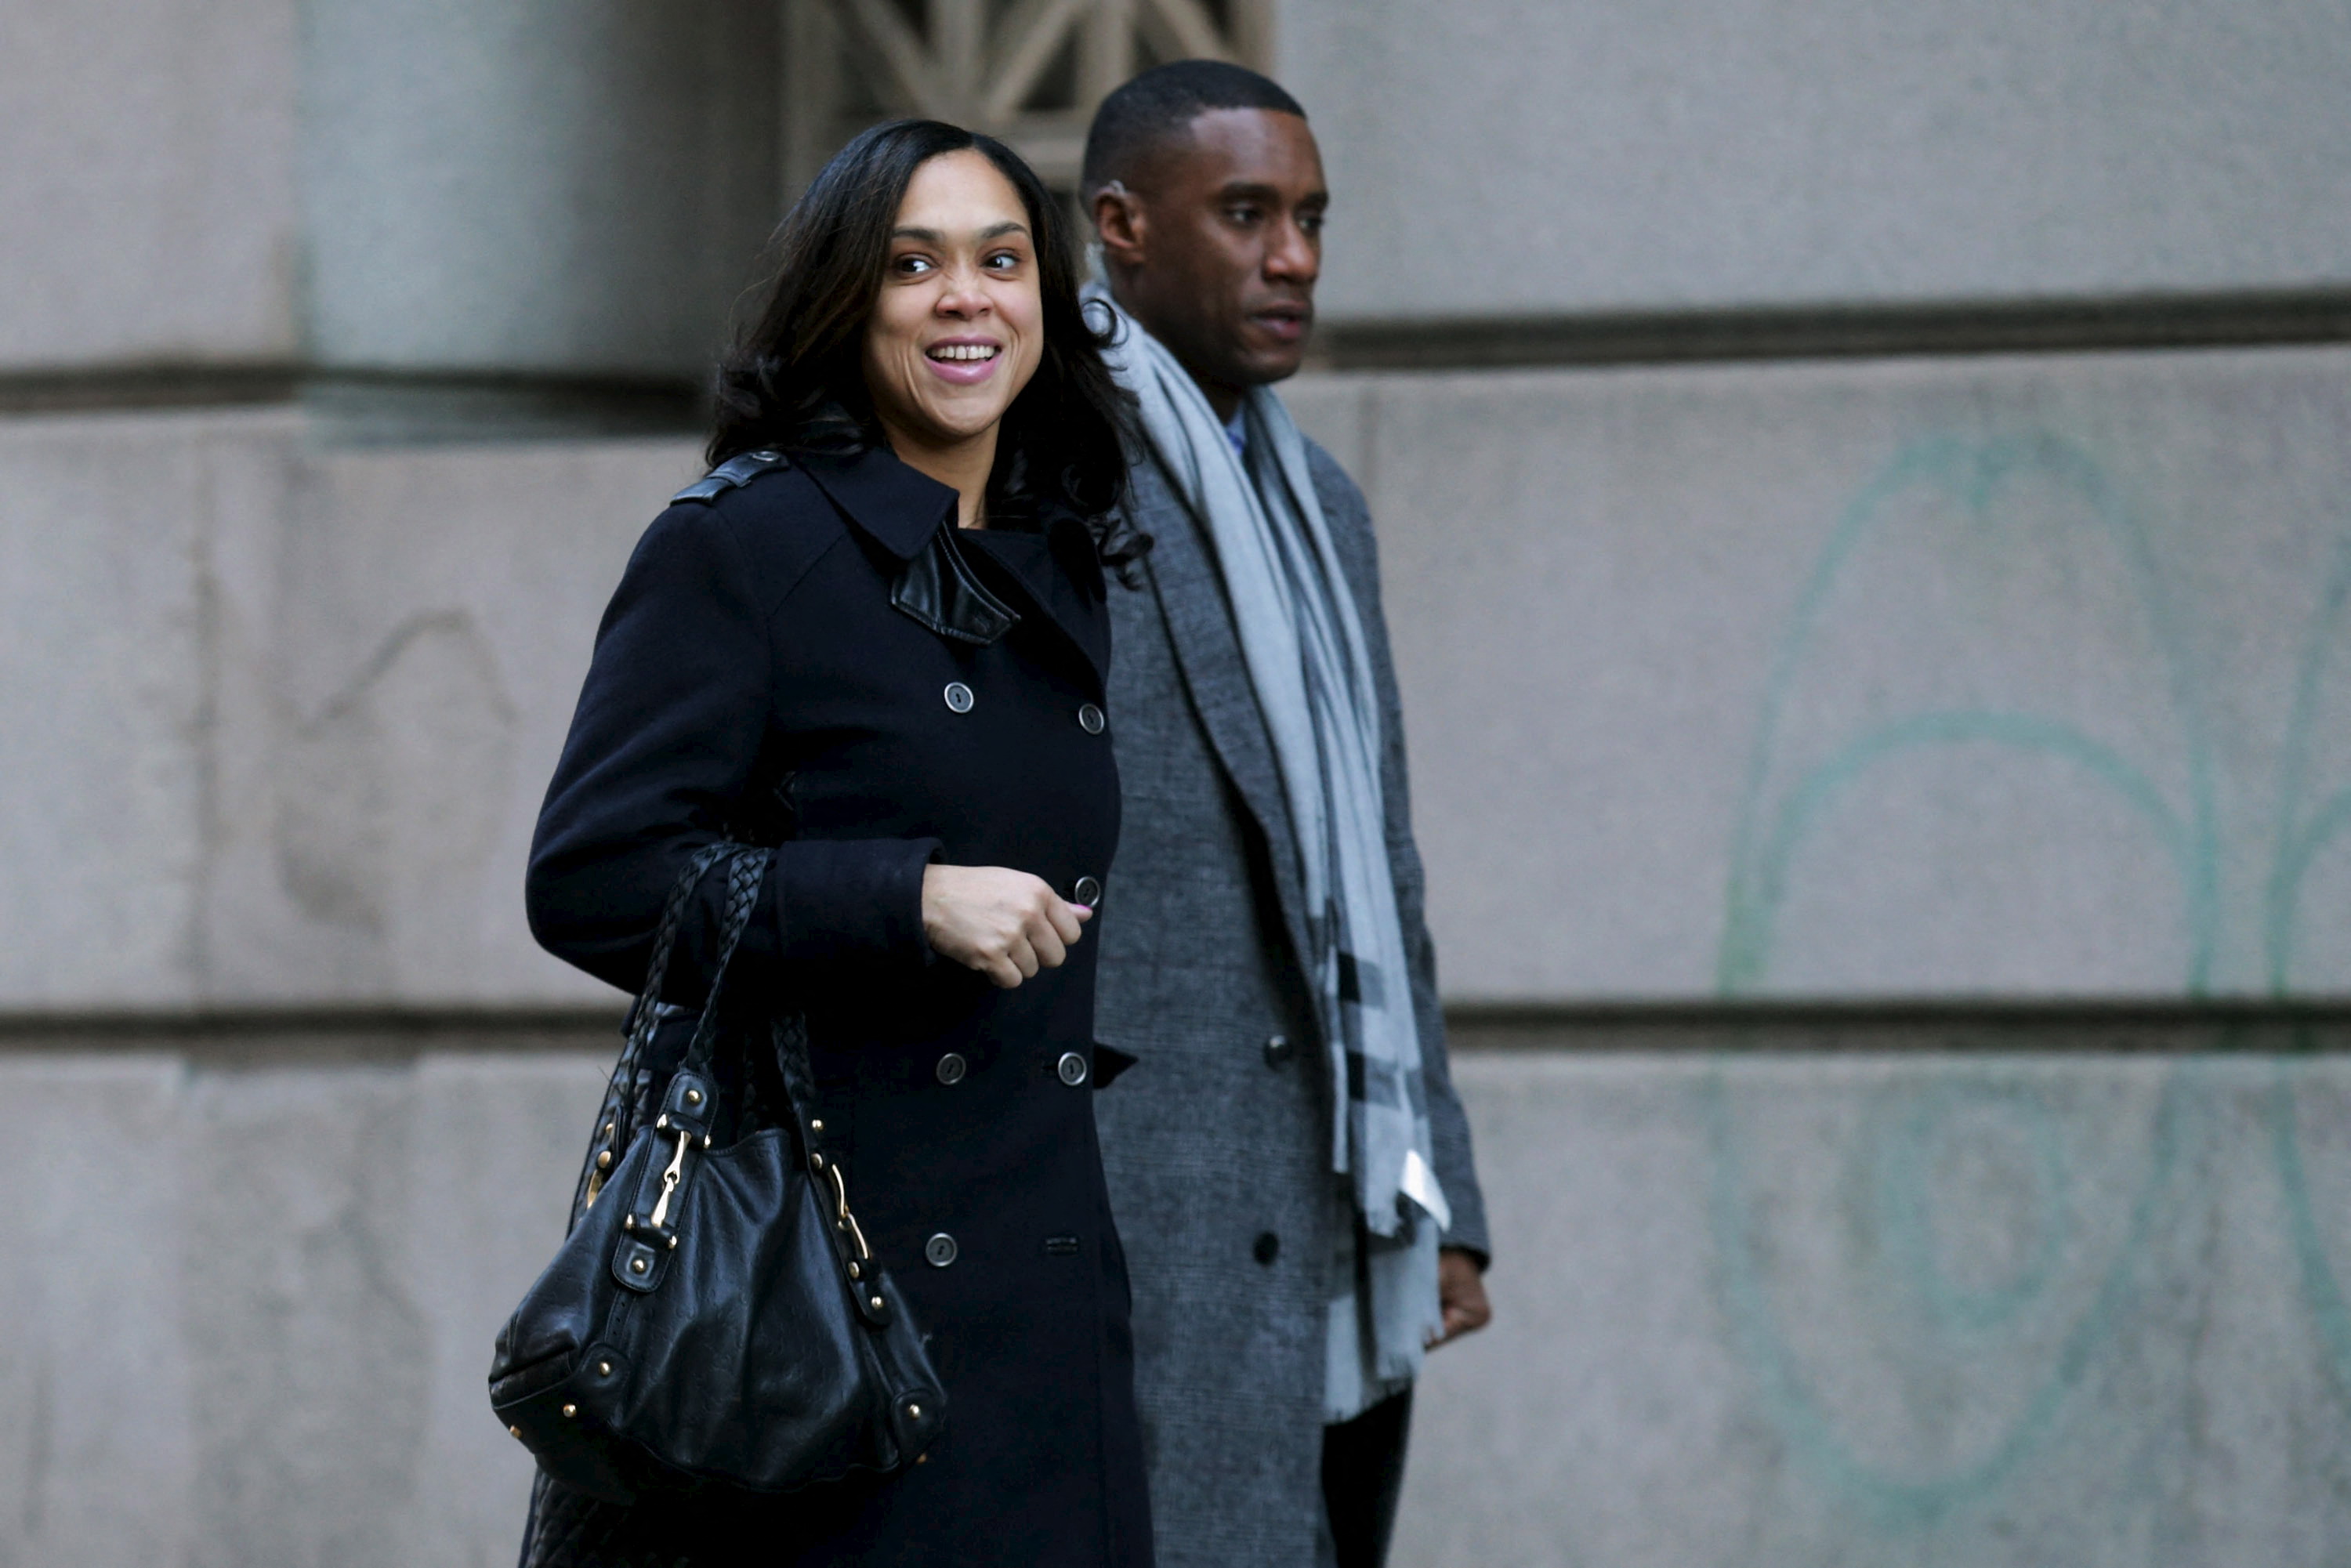 Baltimore City State's Attorney Mosby arrives at the Mitchell Courthouse for jury selection in the case of Officer Caesar Goodson in Baltimore in Baltimore